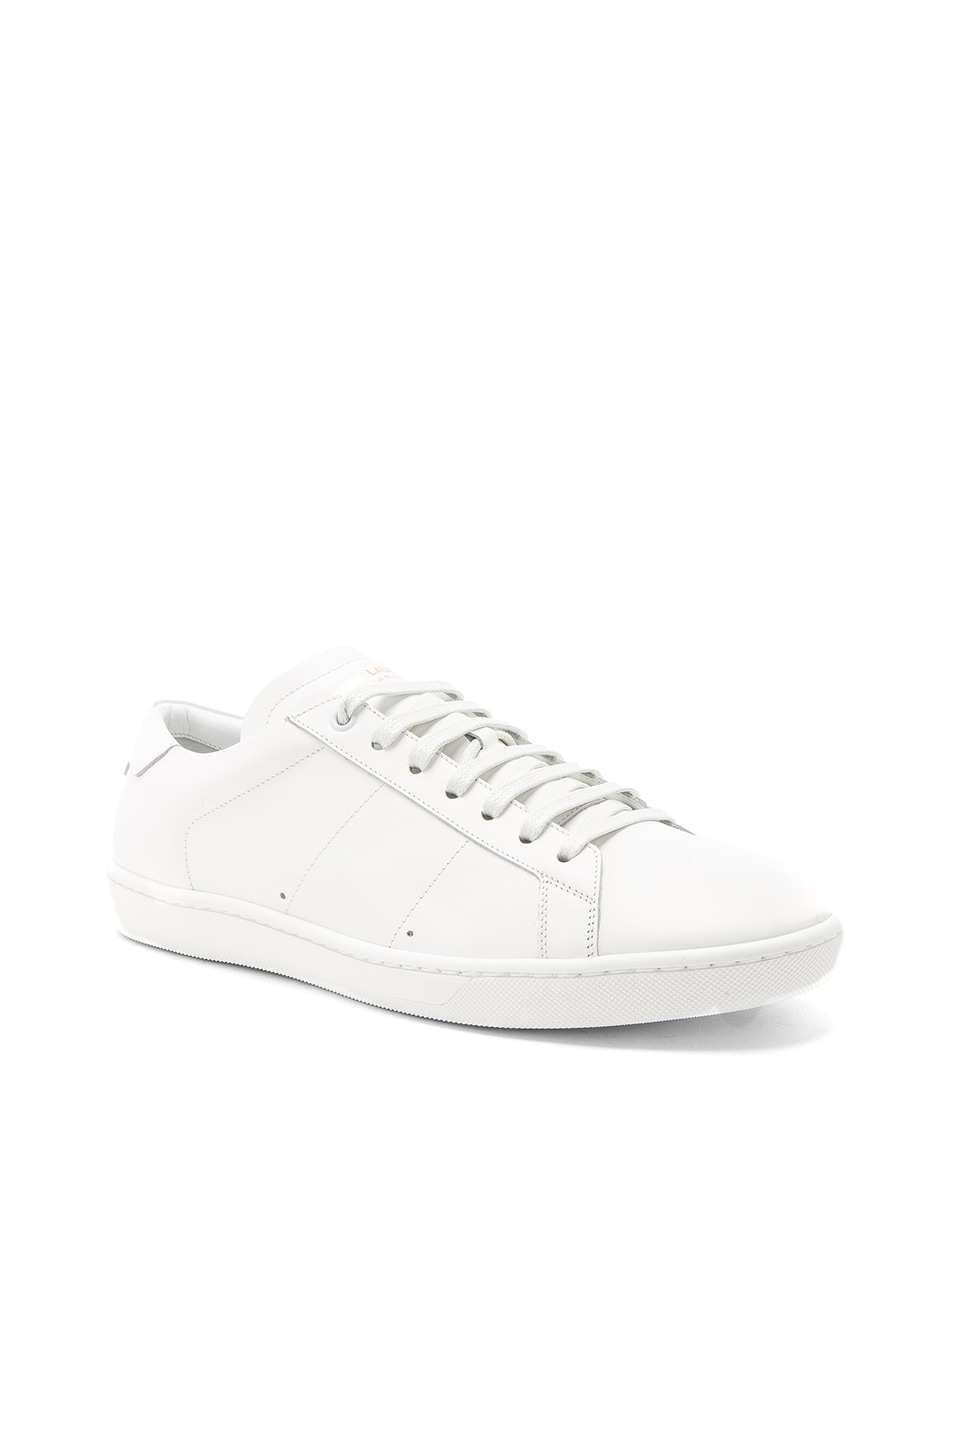 Image 1 of Saint Laurent Court Classic SL/01 Sneakers in White